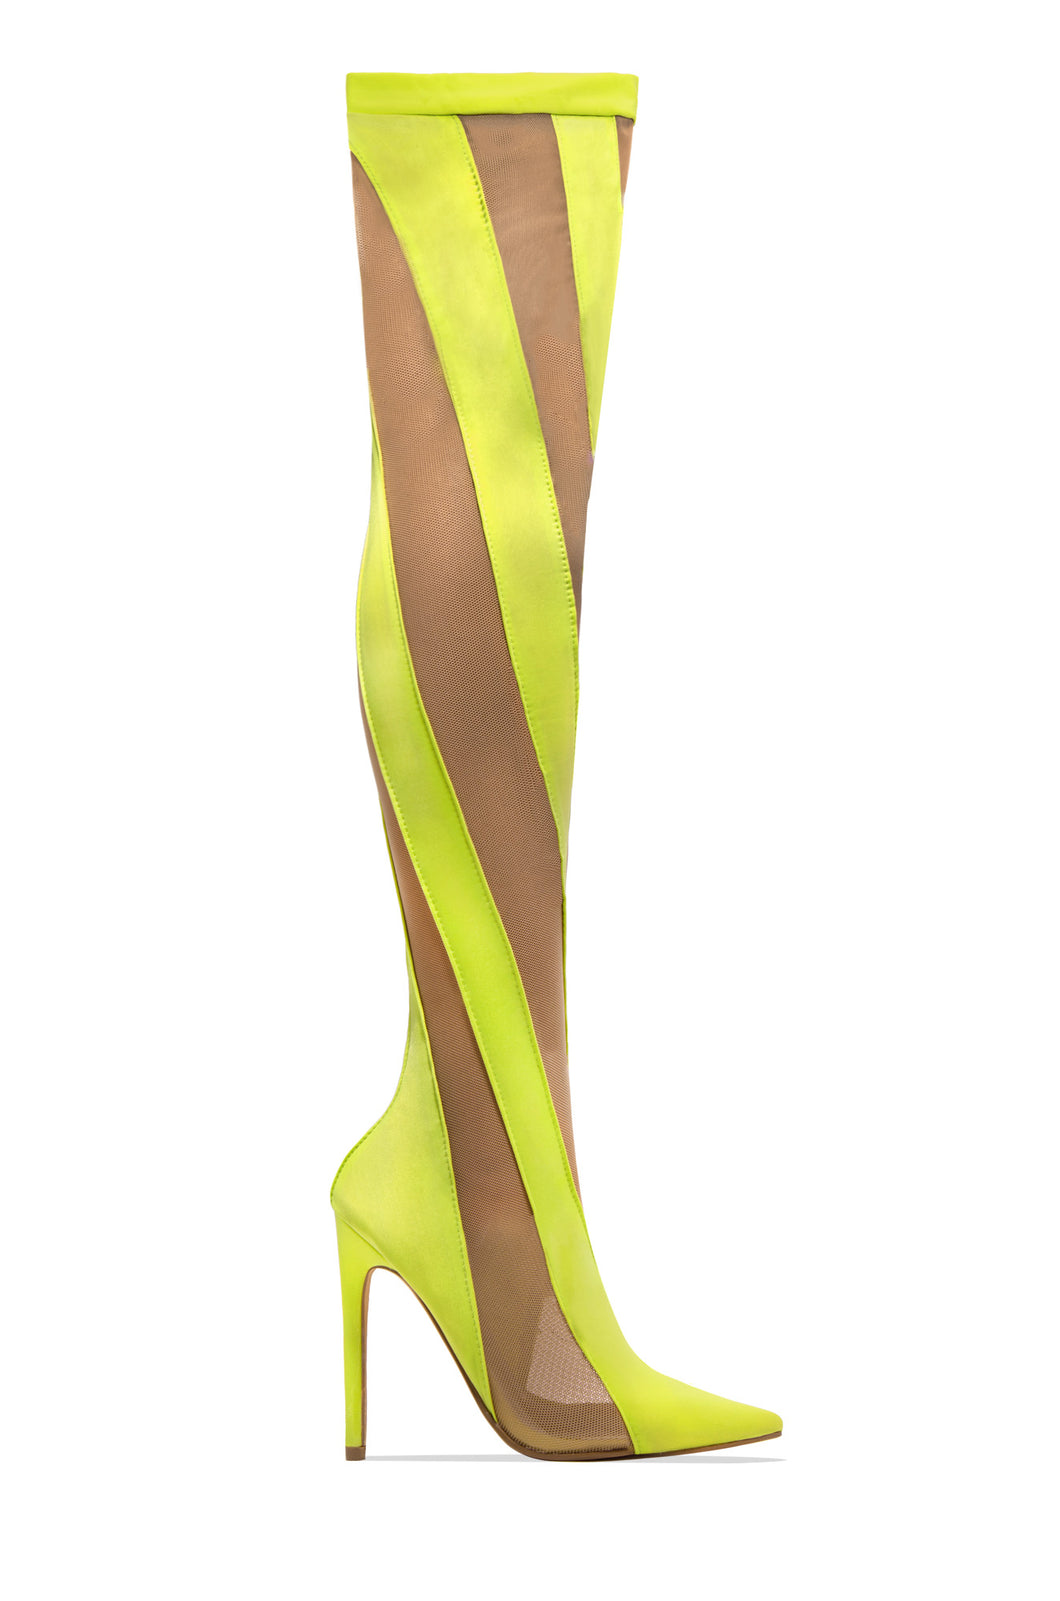 Jenner Over The Knee Heel Boots - Yellow